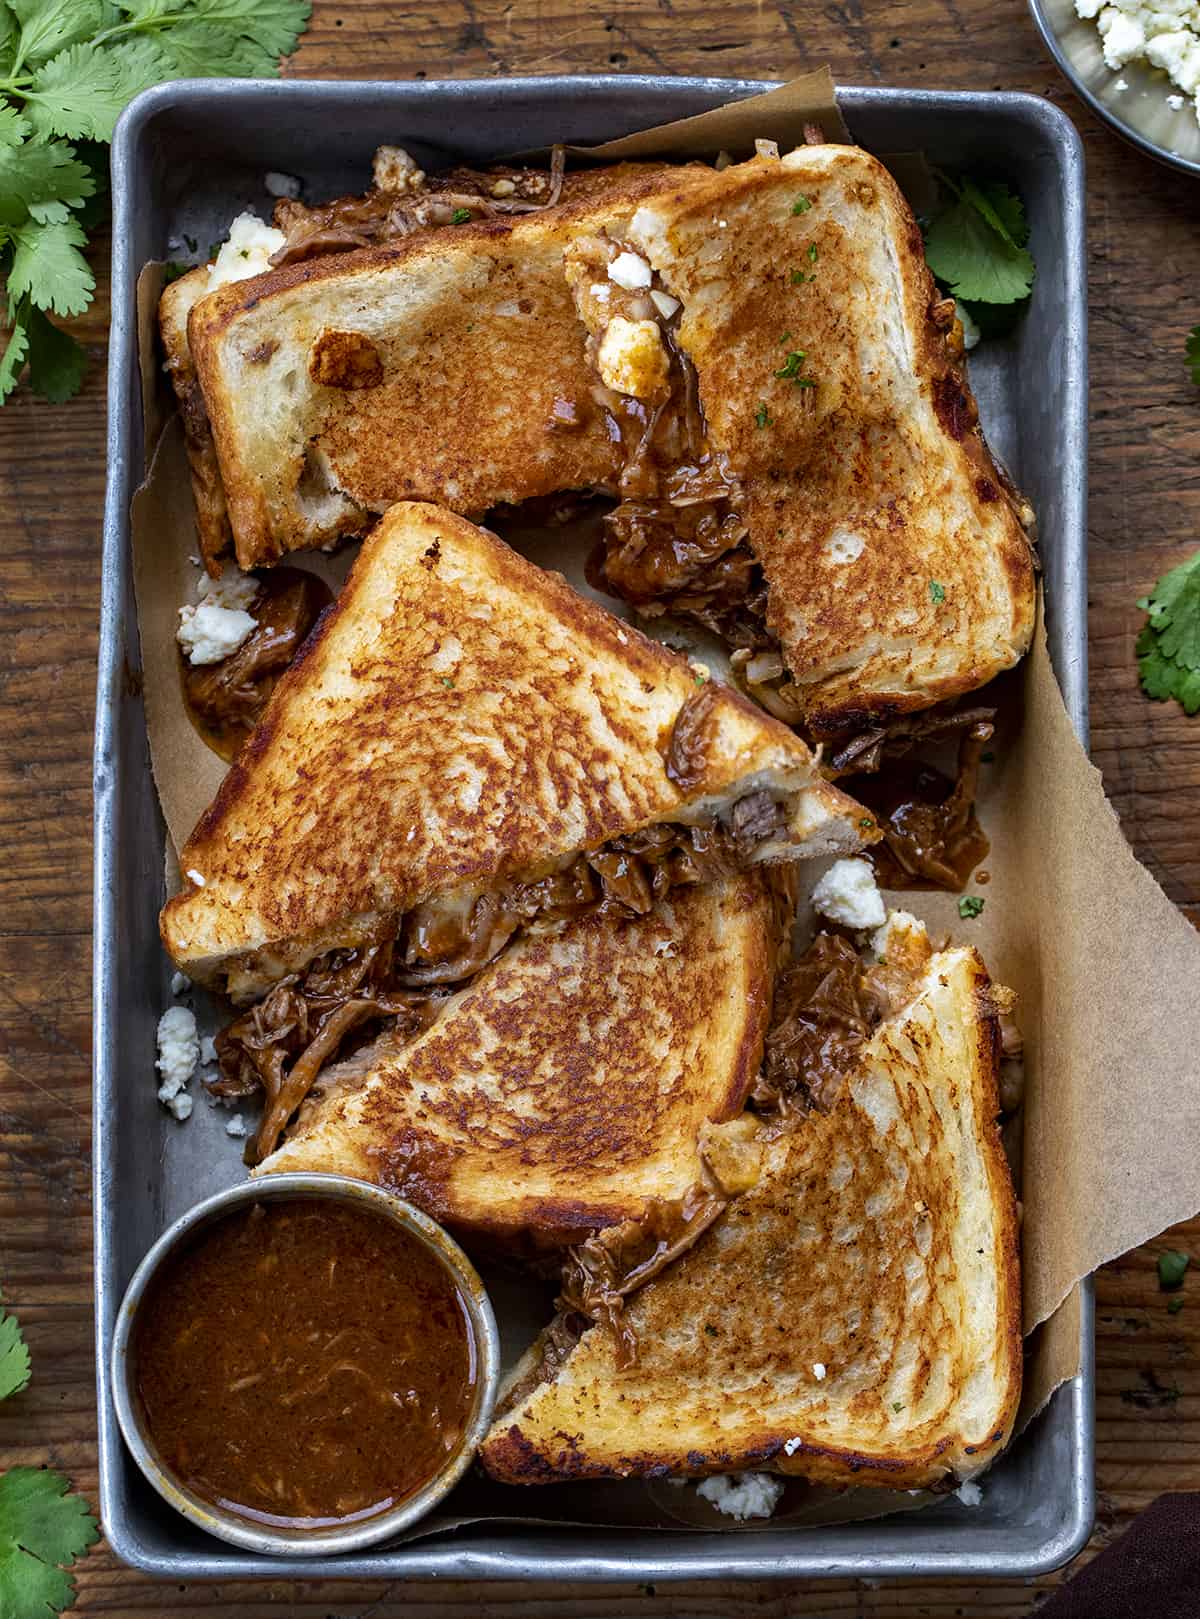 Halved Shredded Beef Birria Grilled Cheese Sandwiches in a Pan from OVerhead. Dinner, Supper. Grilled Cheese, Best Grilled Cheese, Birria Grilled Cheese Sandwich, Shredded Beef Grilled Cheese, Superbowl Food, Game Day Food, Football Recipes, i am homesteader, iamhomesteader